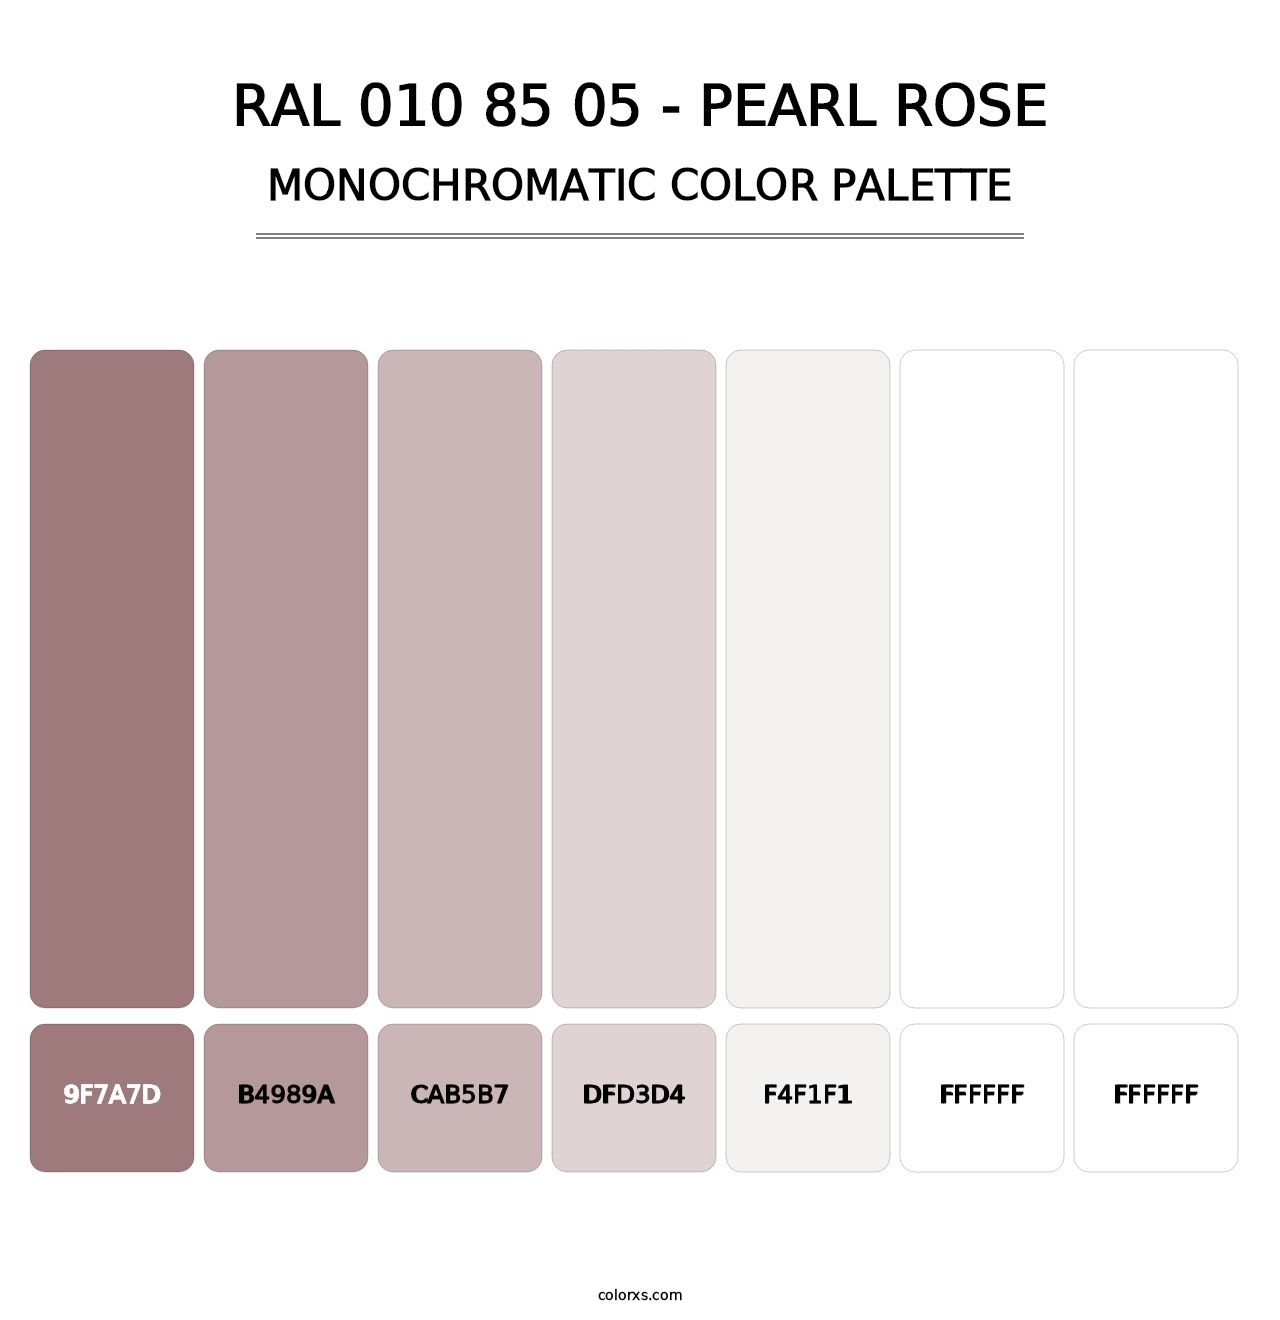 RAL 010 85 05 - Pearl Rose - Monochromatic Color Palette